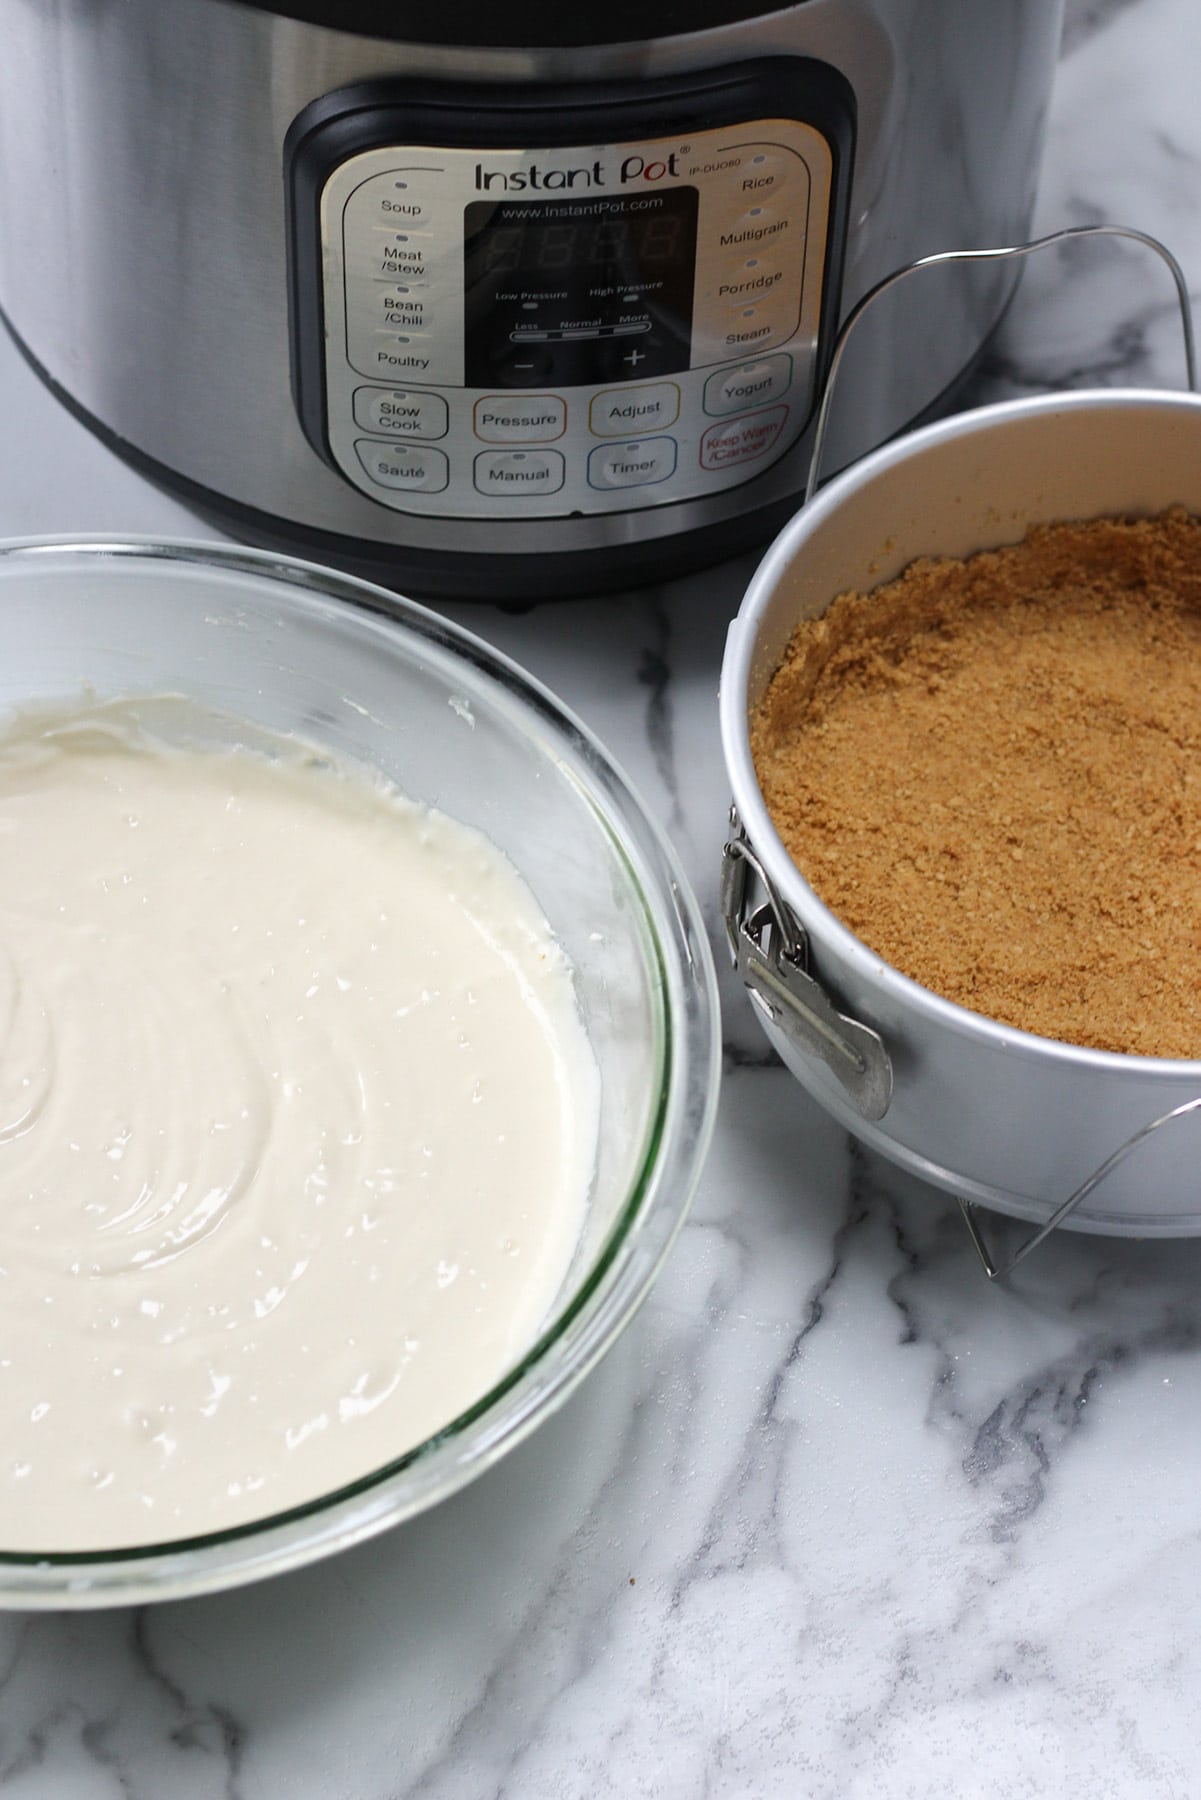 cheesecake batter in a glass bowl, a spring form pan with a graham cracker crust and an instant pot in the background. 